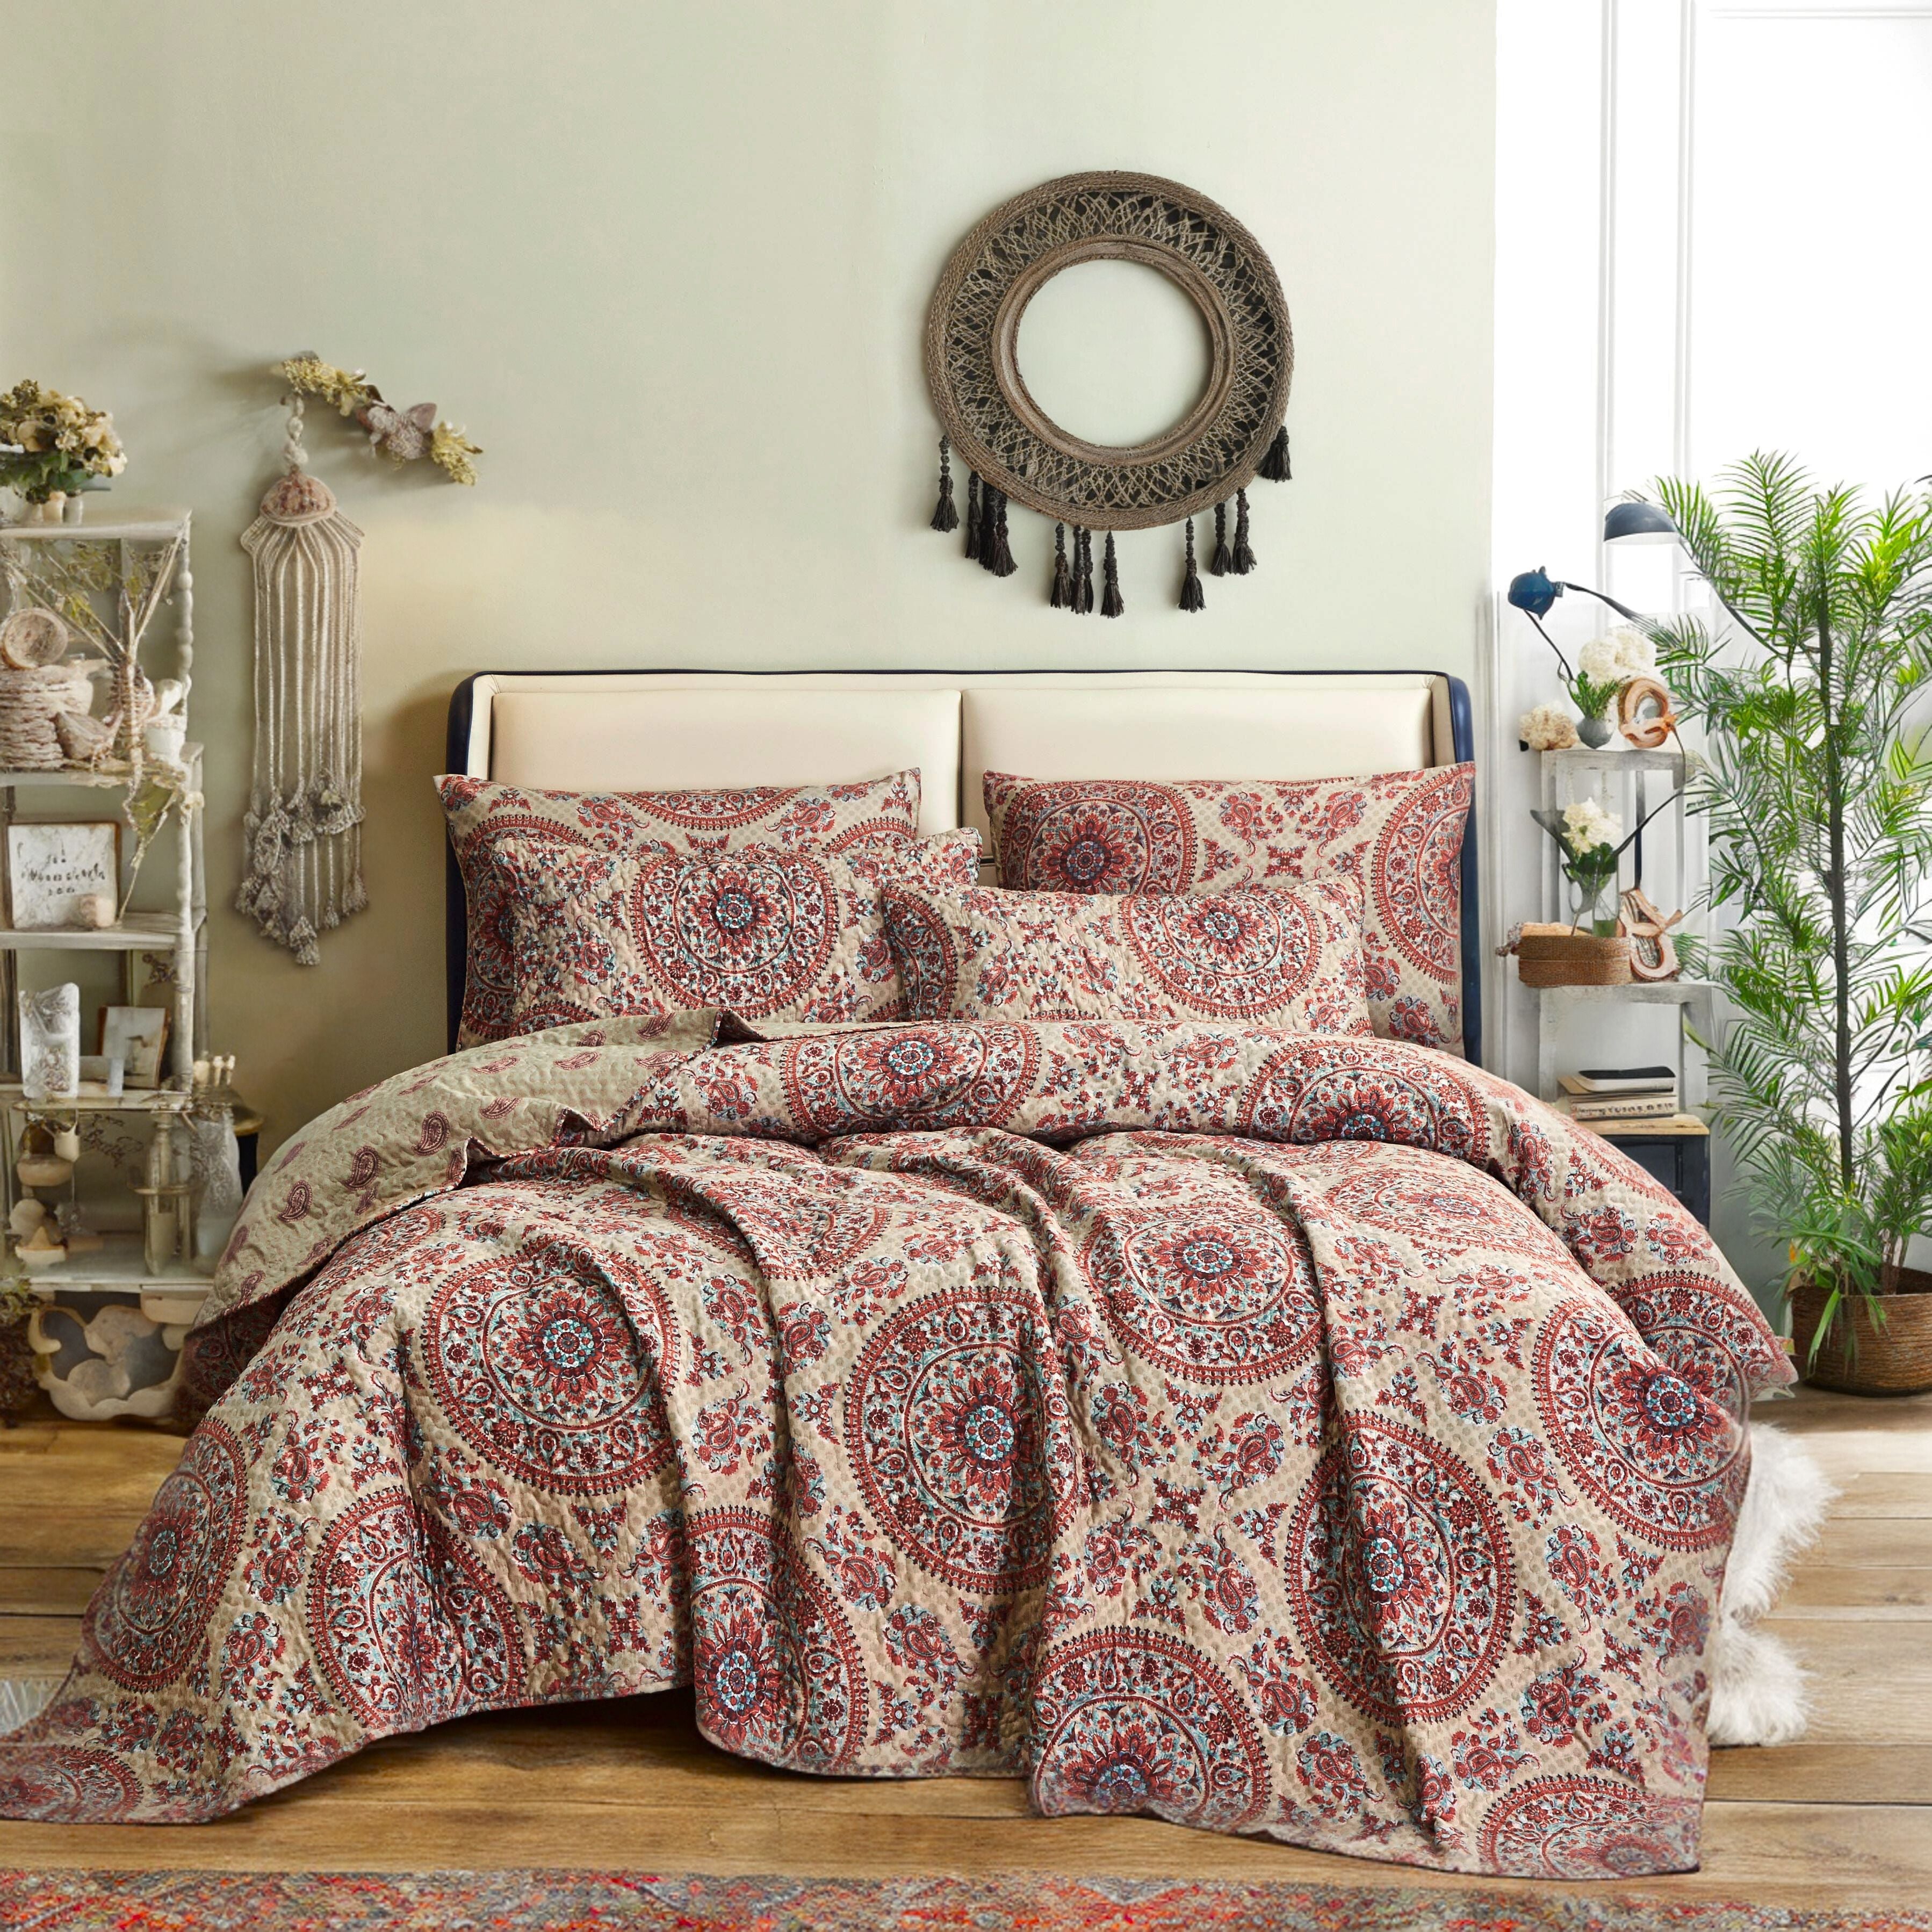 A Bohemian-style bedroom with a vibrant taupe beige and burgundy medallion print quilt and plush pillows